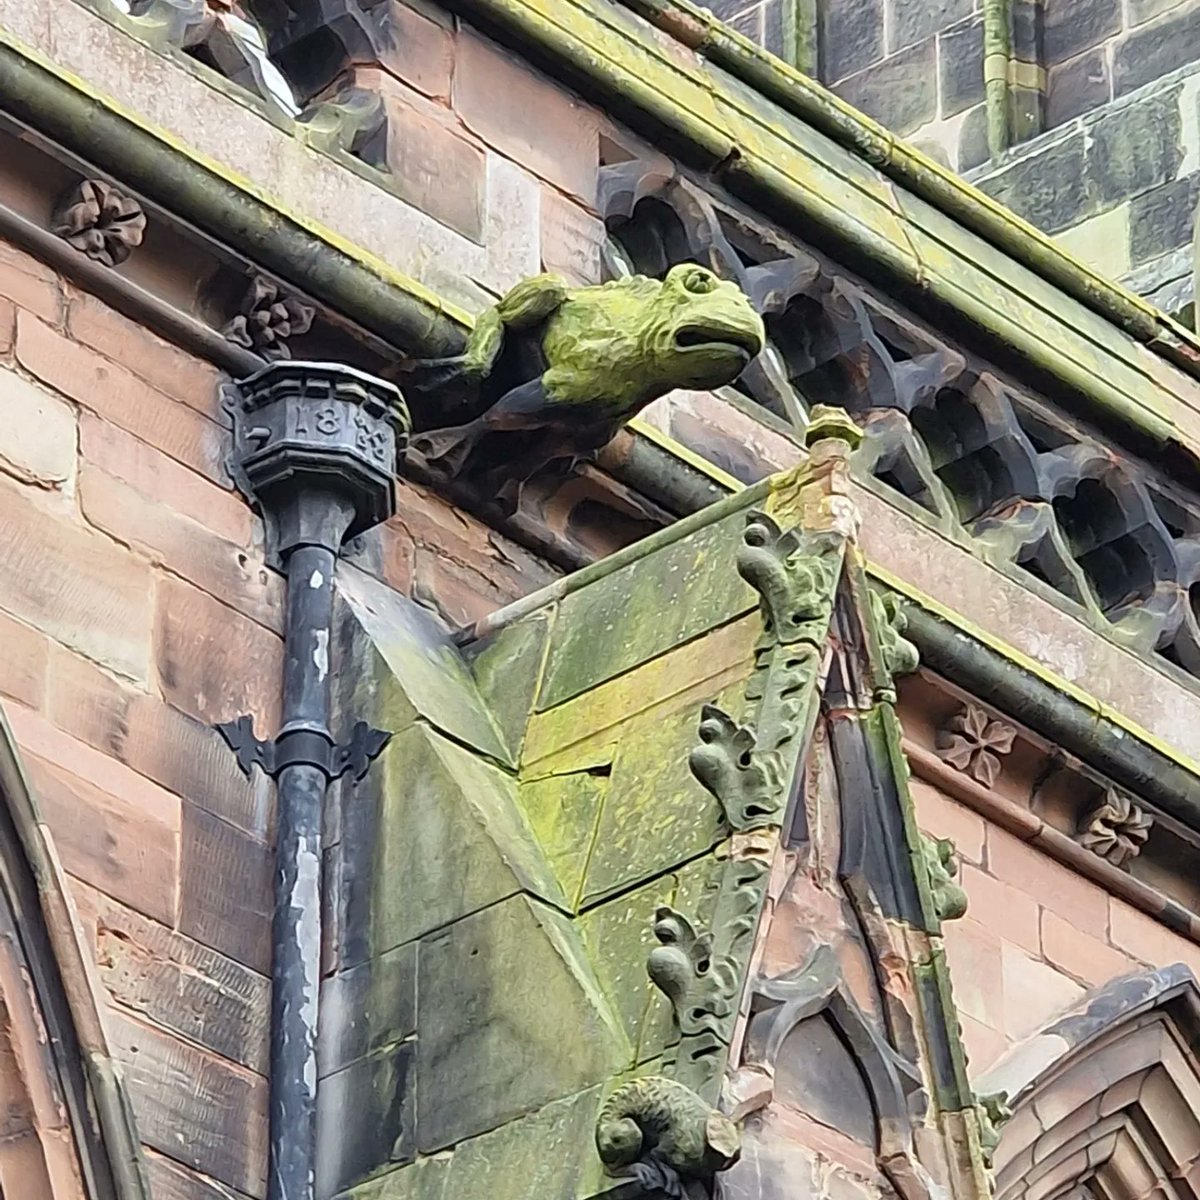 A lovely frog for Friday!

#frogsonfriday #wolverhampton #grotesque #gargoyle #churchart #churchcarving #churchyardtreasures #churchcrawling #theblackcountry #gothicchurch #victorian #stpeter #churcharchitecture #hopper #stonework #carvedstone #churchcarving